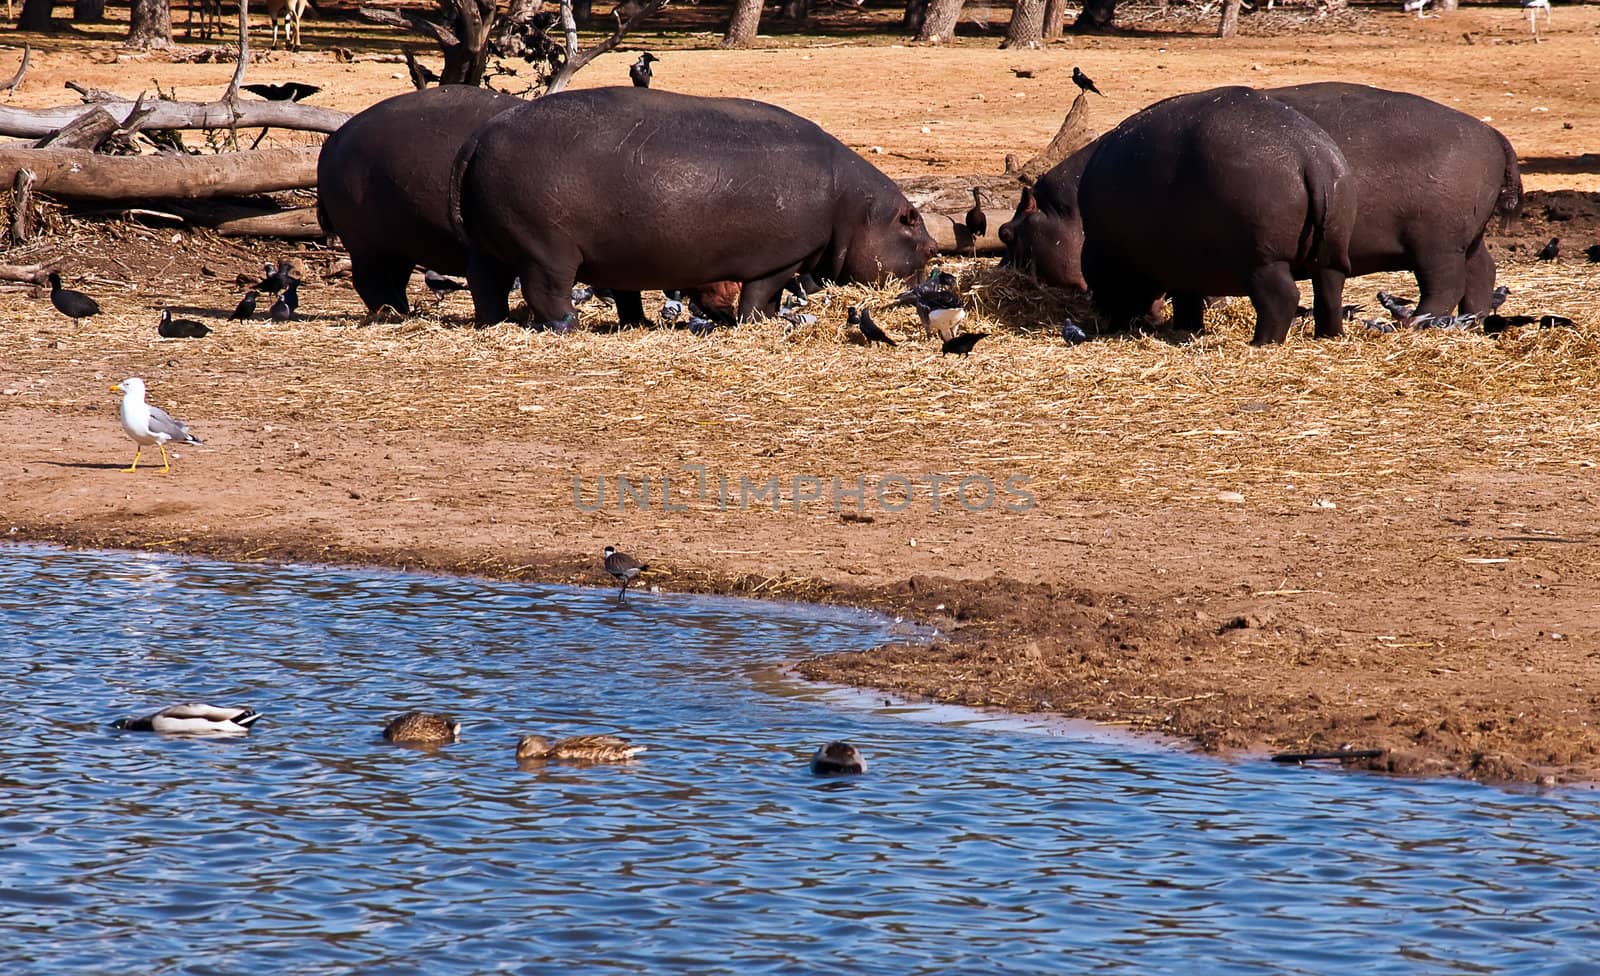 Hippo  . by LarisaP